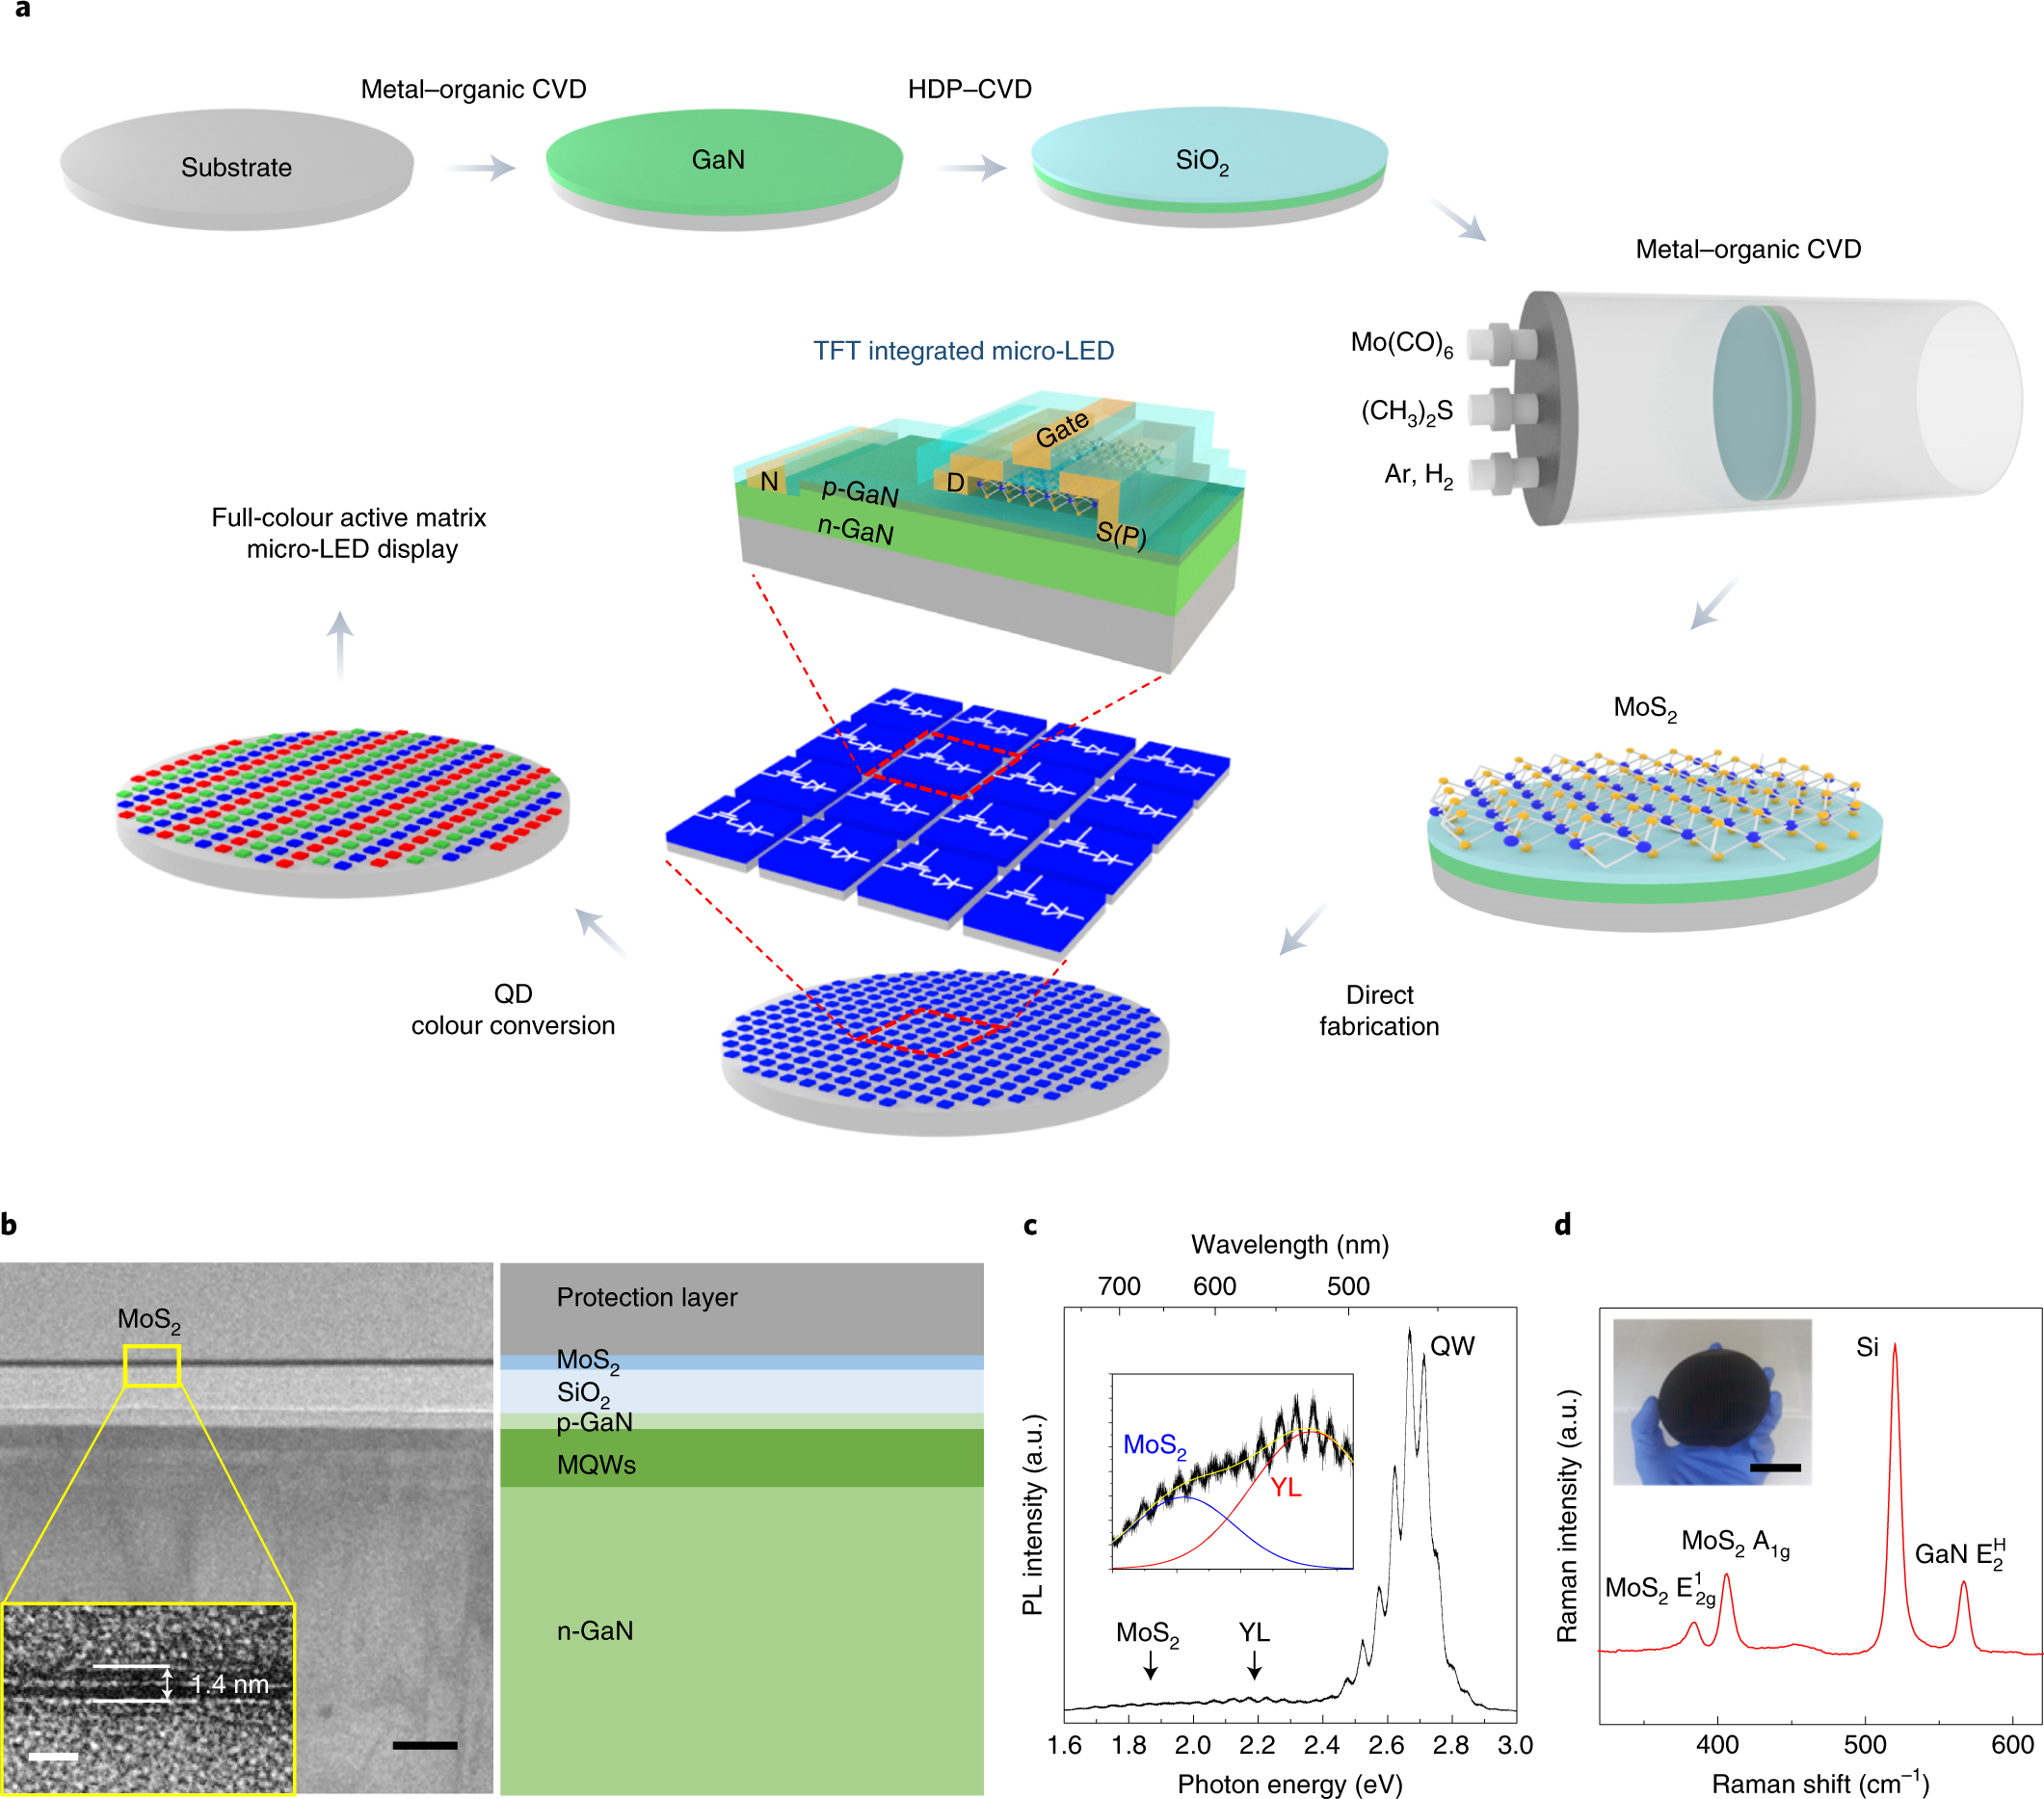 Wafer-scale monolithic integration of full-colour micro-LED display using  MoS2 transistor